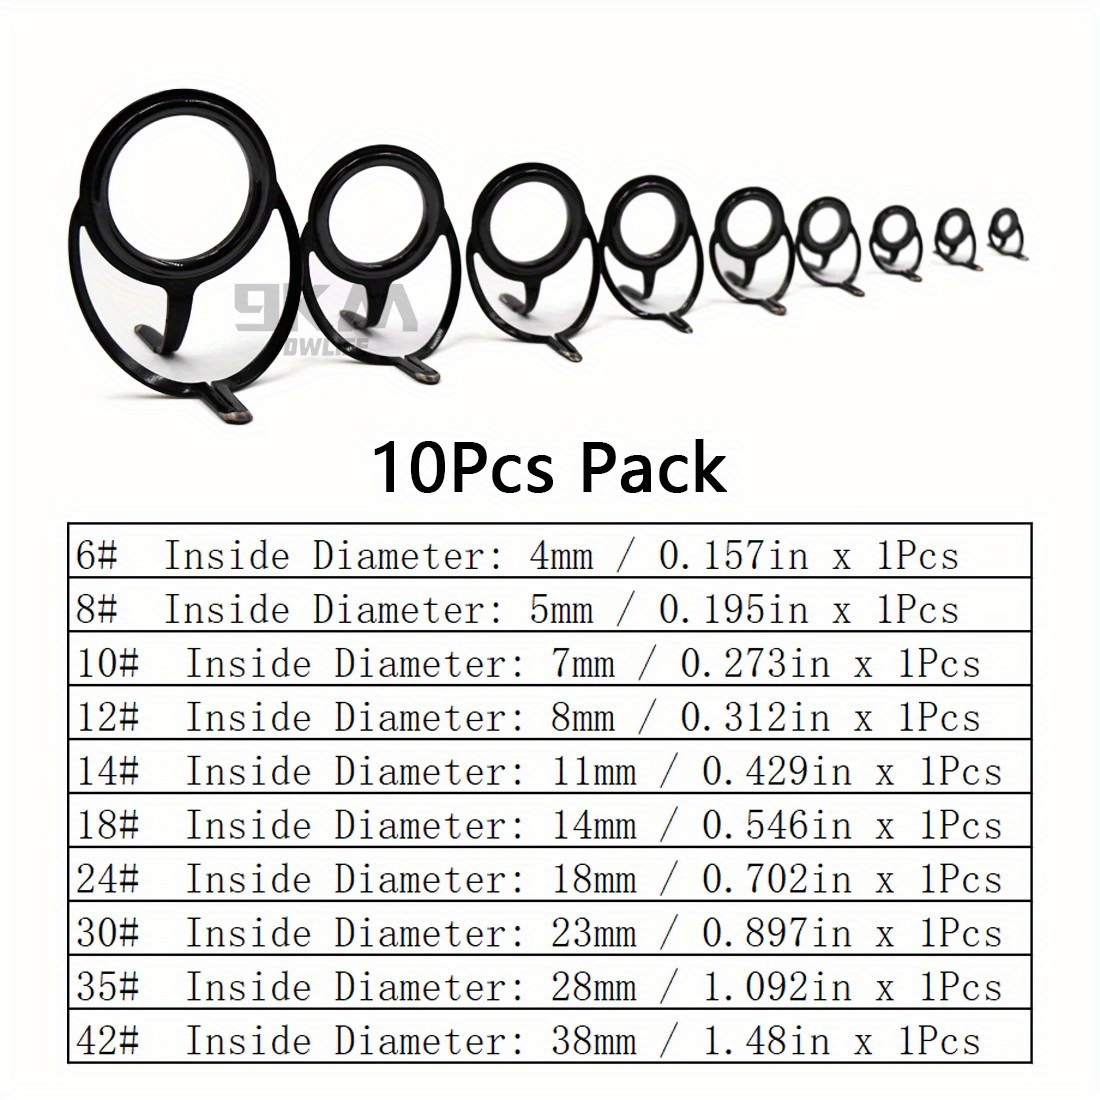 9pcs Replacement Fishing Rod Top Ring Tip Eye Guide Repair Building  Stainless Kit Set For Spin Or Casting Fishing Rod Guides